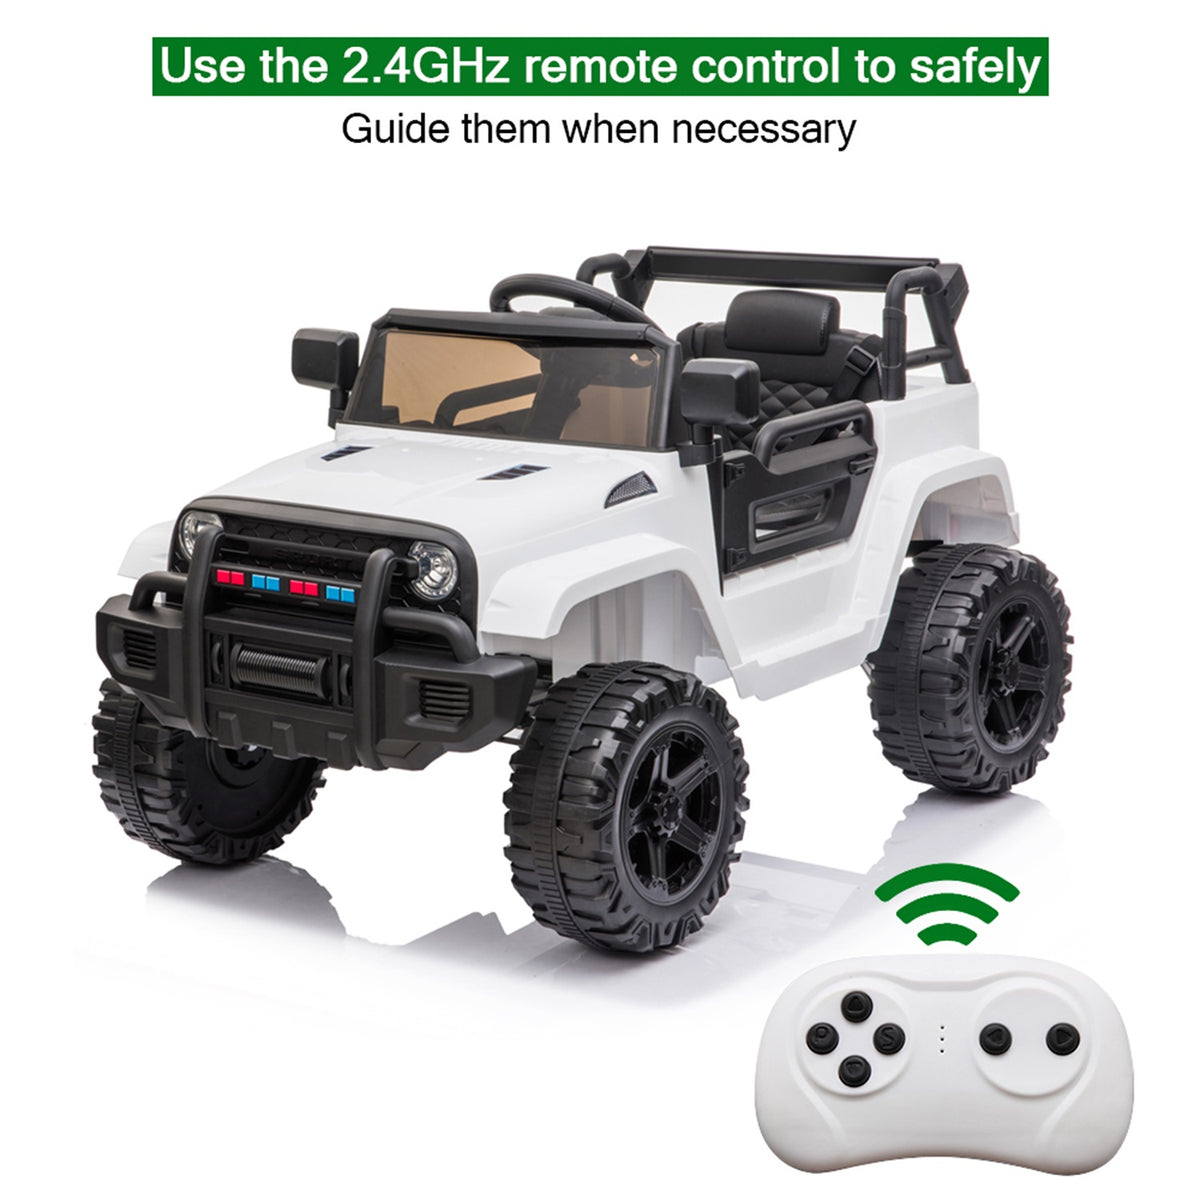 Kids Ride On Truck, Remote Control Kids Electric Ride-on Car, 12V Battery Motorized Vehicles Age 3-5 with 3 Speeds (White)